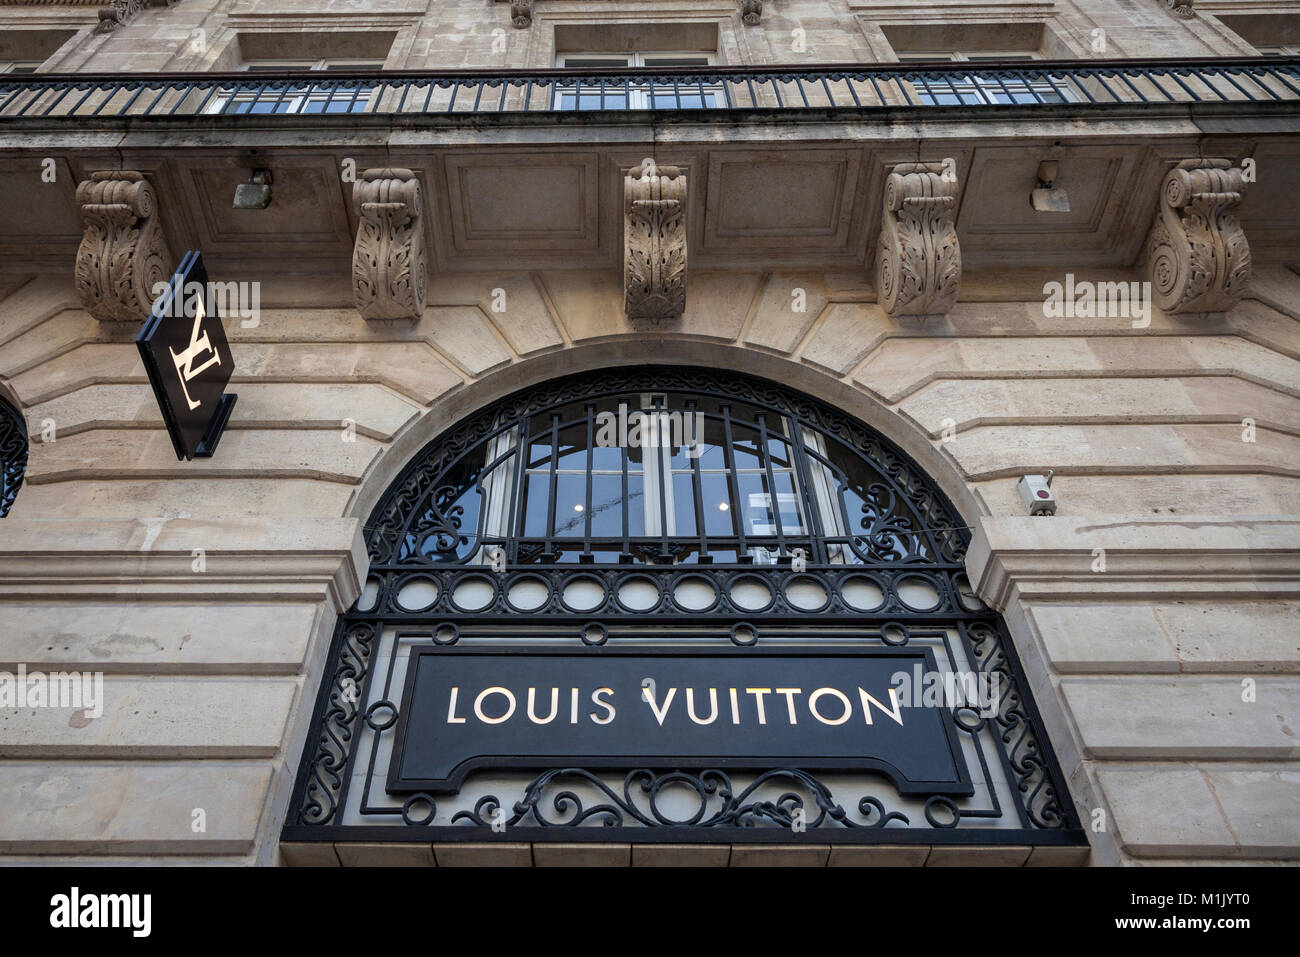 POZNAN, POL - JUN 20, 2020: Laptop computer displaying logo of Louis Vuitton,  a French fashion house and luxury retail company founded in 1854 by Loui  Stock Photo - Alamy